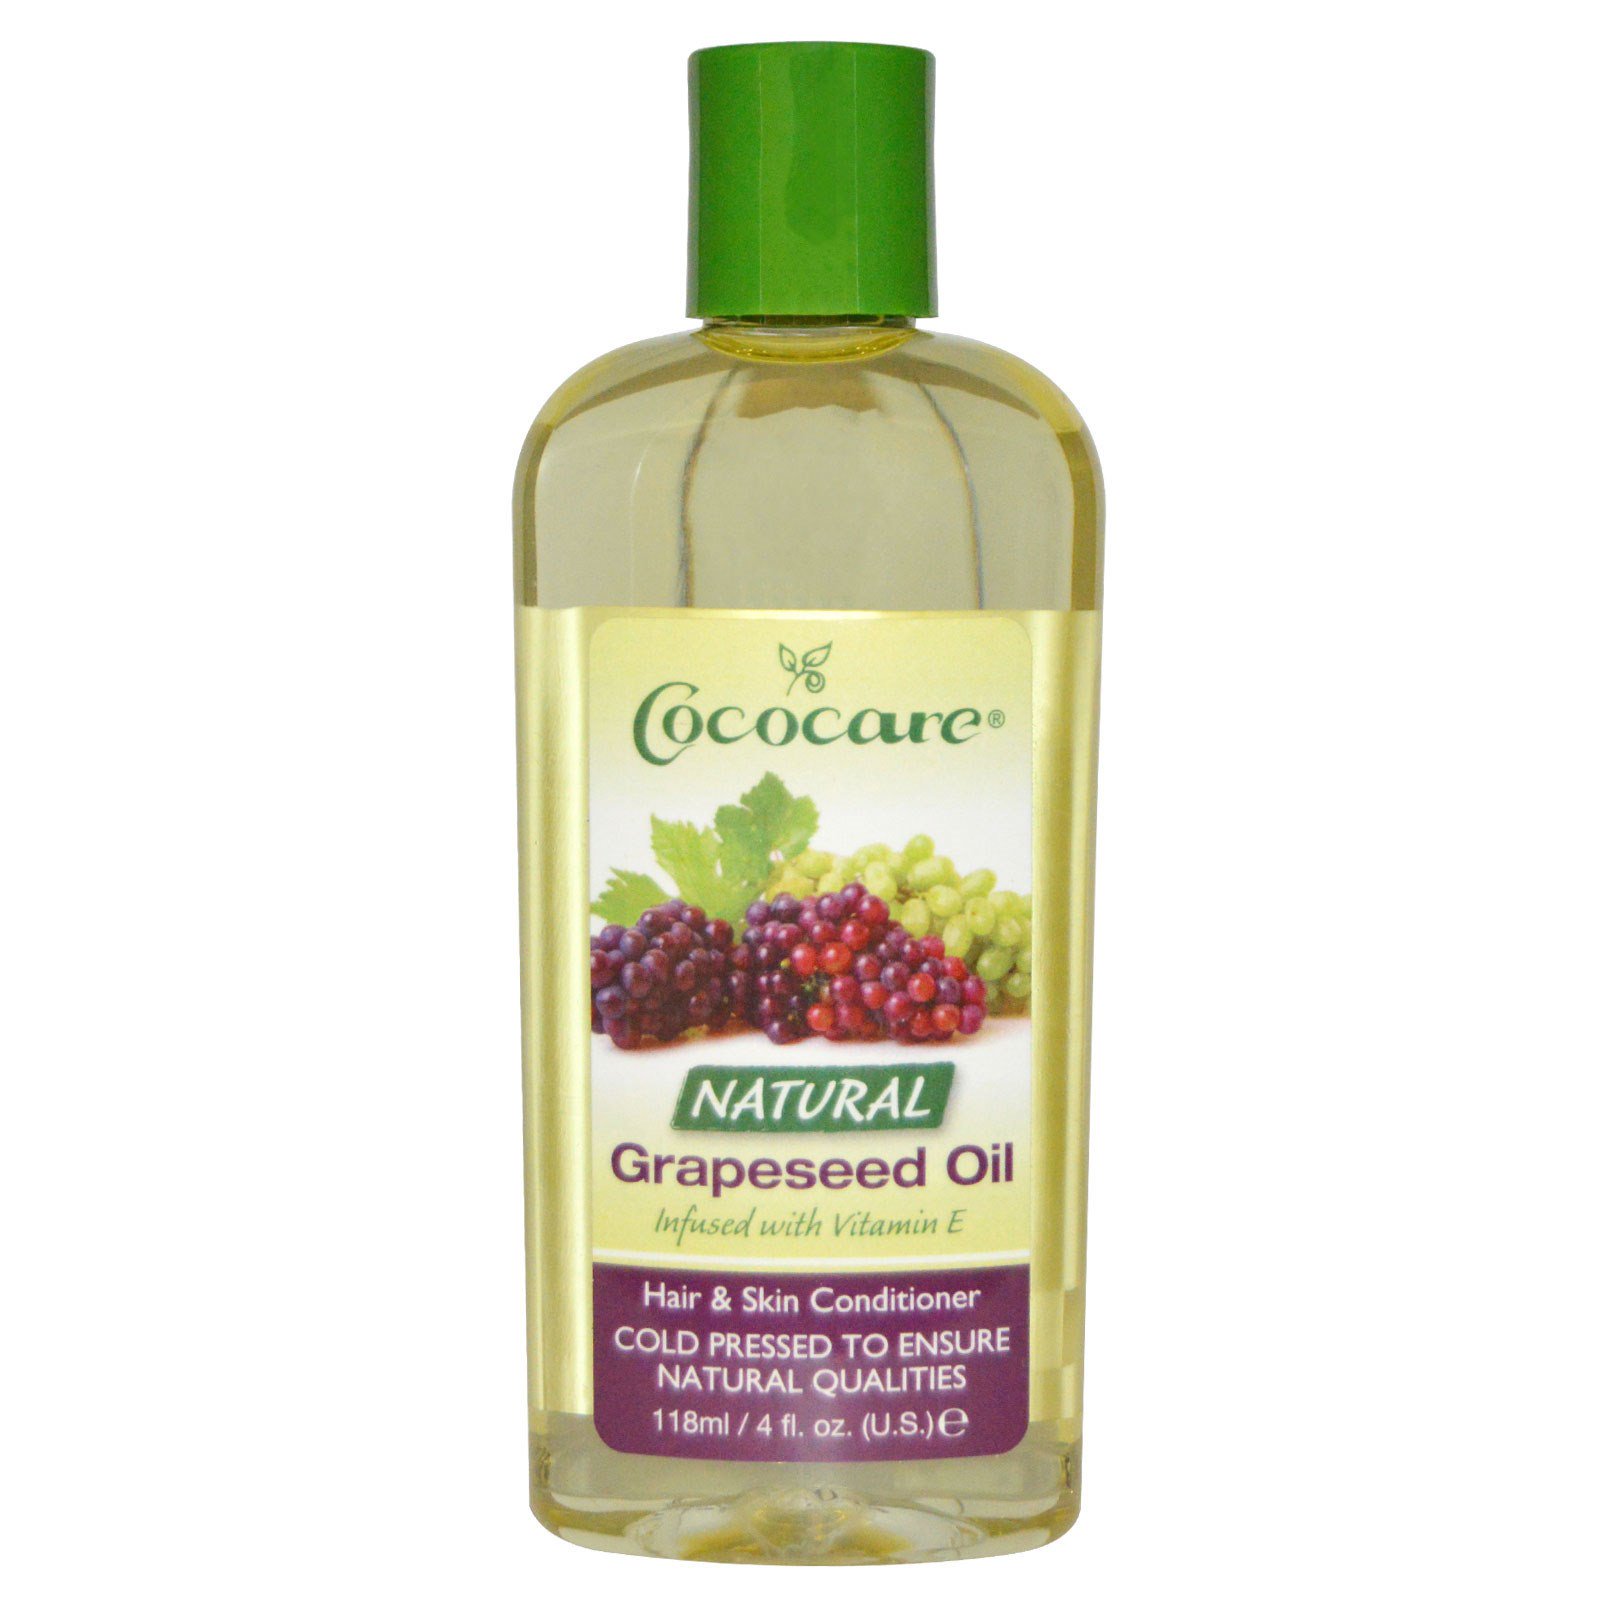 Cococare Hair Skin Conditioner Natural Grapeseed Oil 4 Fl Oz